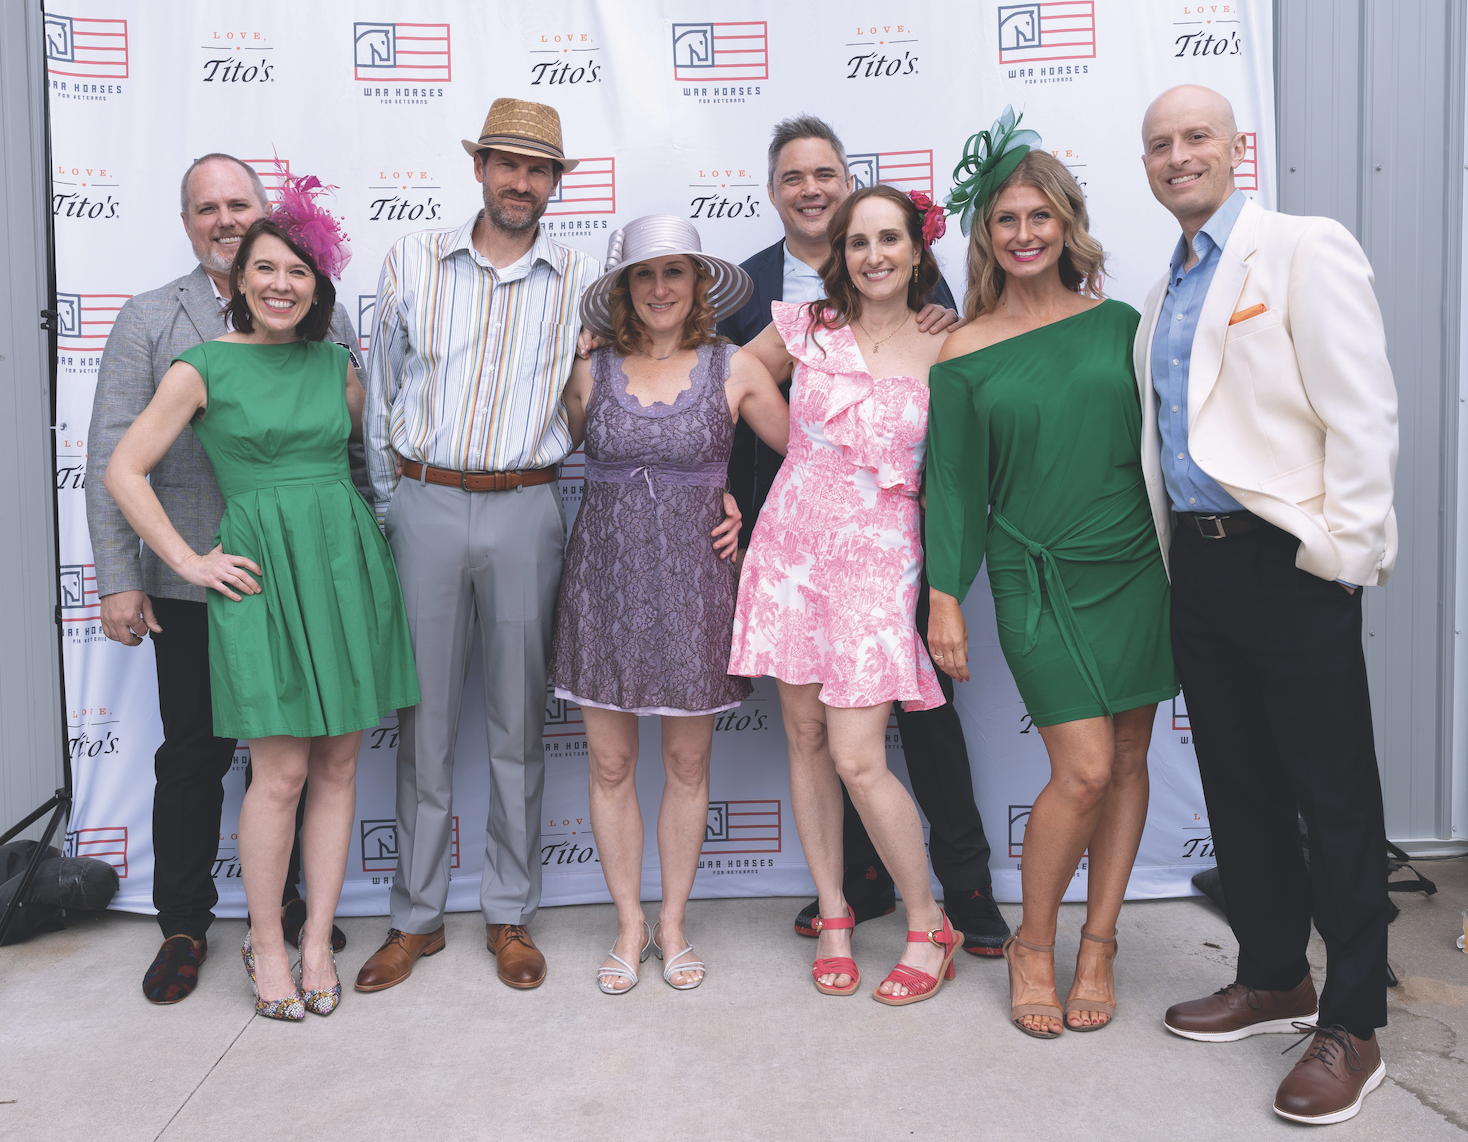 War Horses For Veterans – The Derby Party